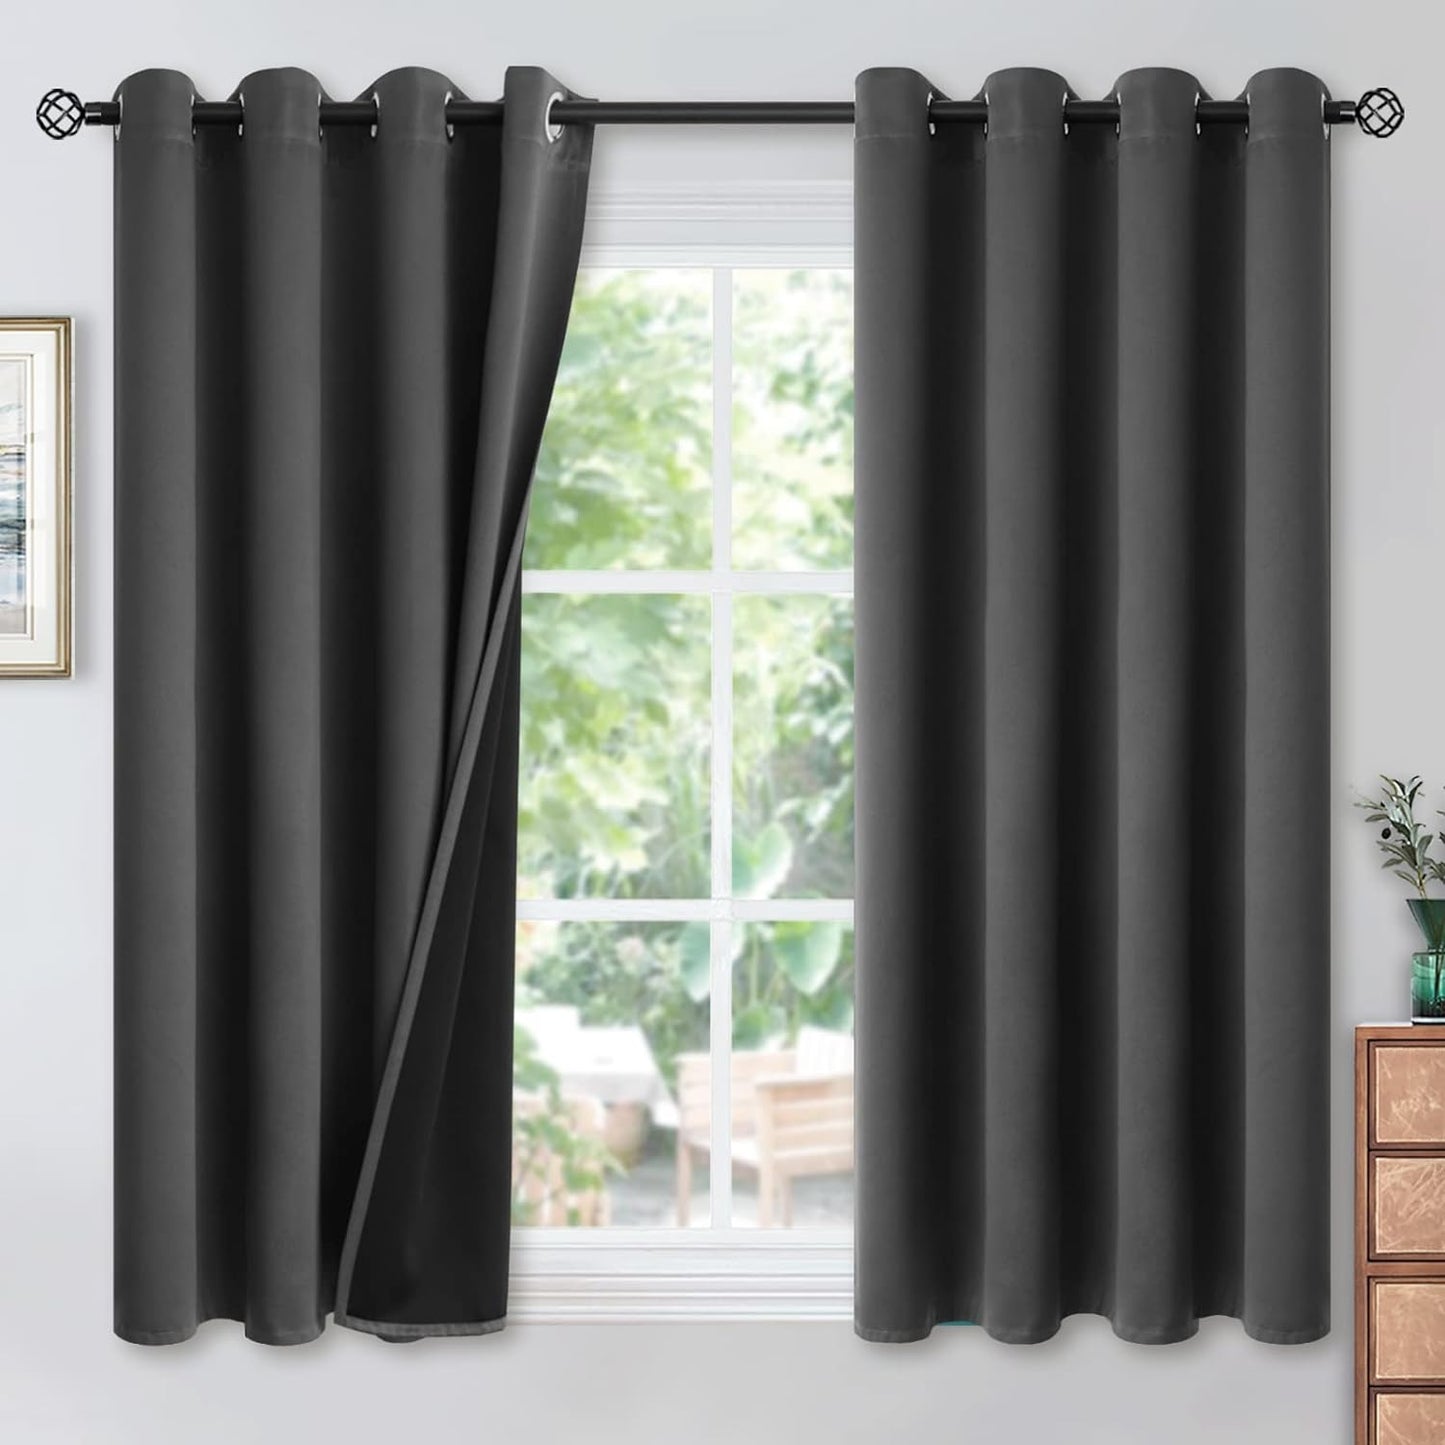 Youngstex Black 100% Blackout Curtains 63 Inches for Bedroom Thermal Insulated Total Room Darkening Curtains for Living Room Window with Black Back Grommet, 2 Panels, 42 X 63 Inch  YoungsTex Dark Grey 52W X 45L 